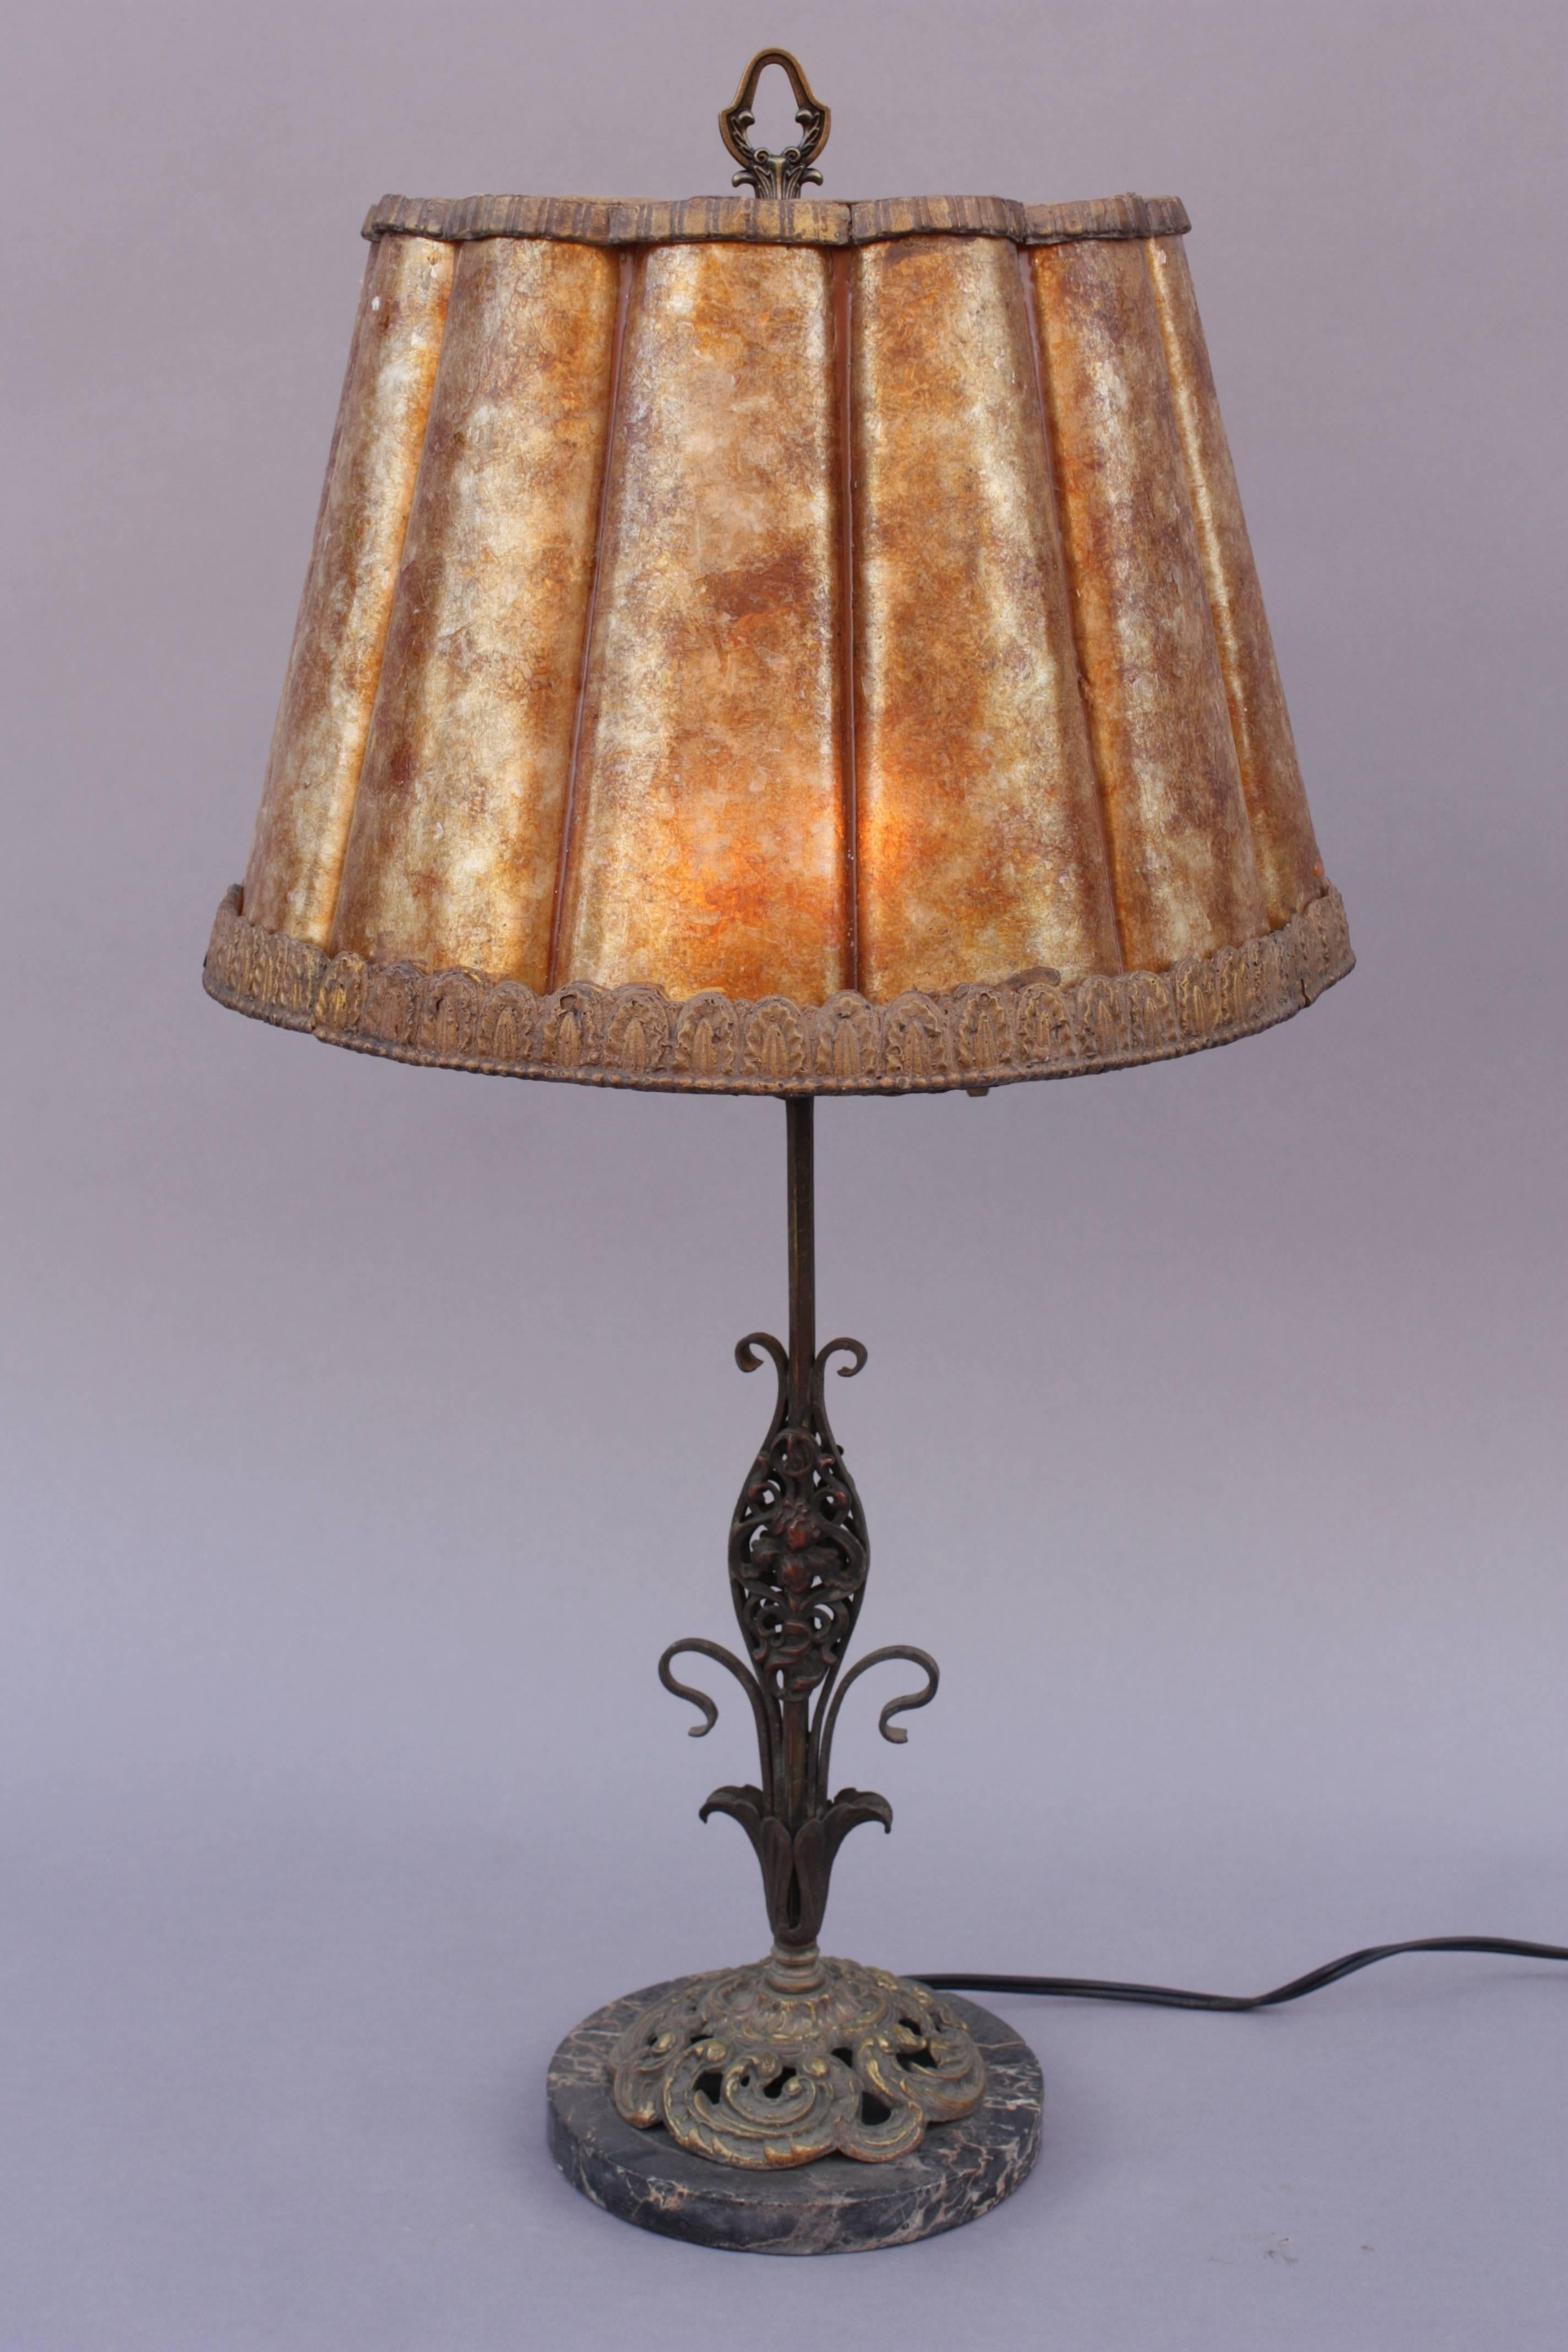 Circa 1920's table lamp with original polychrome finish and marble base.